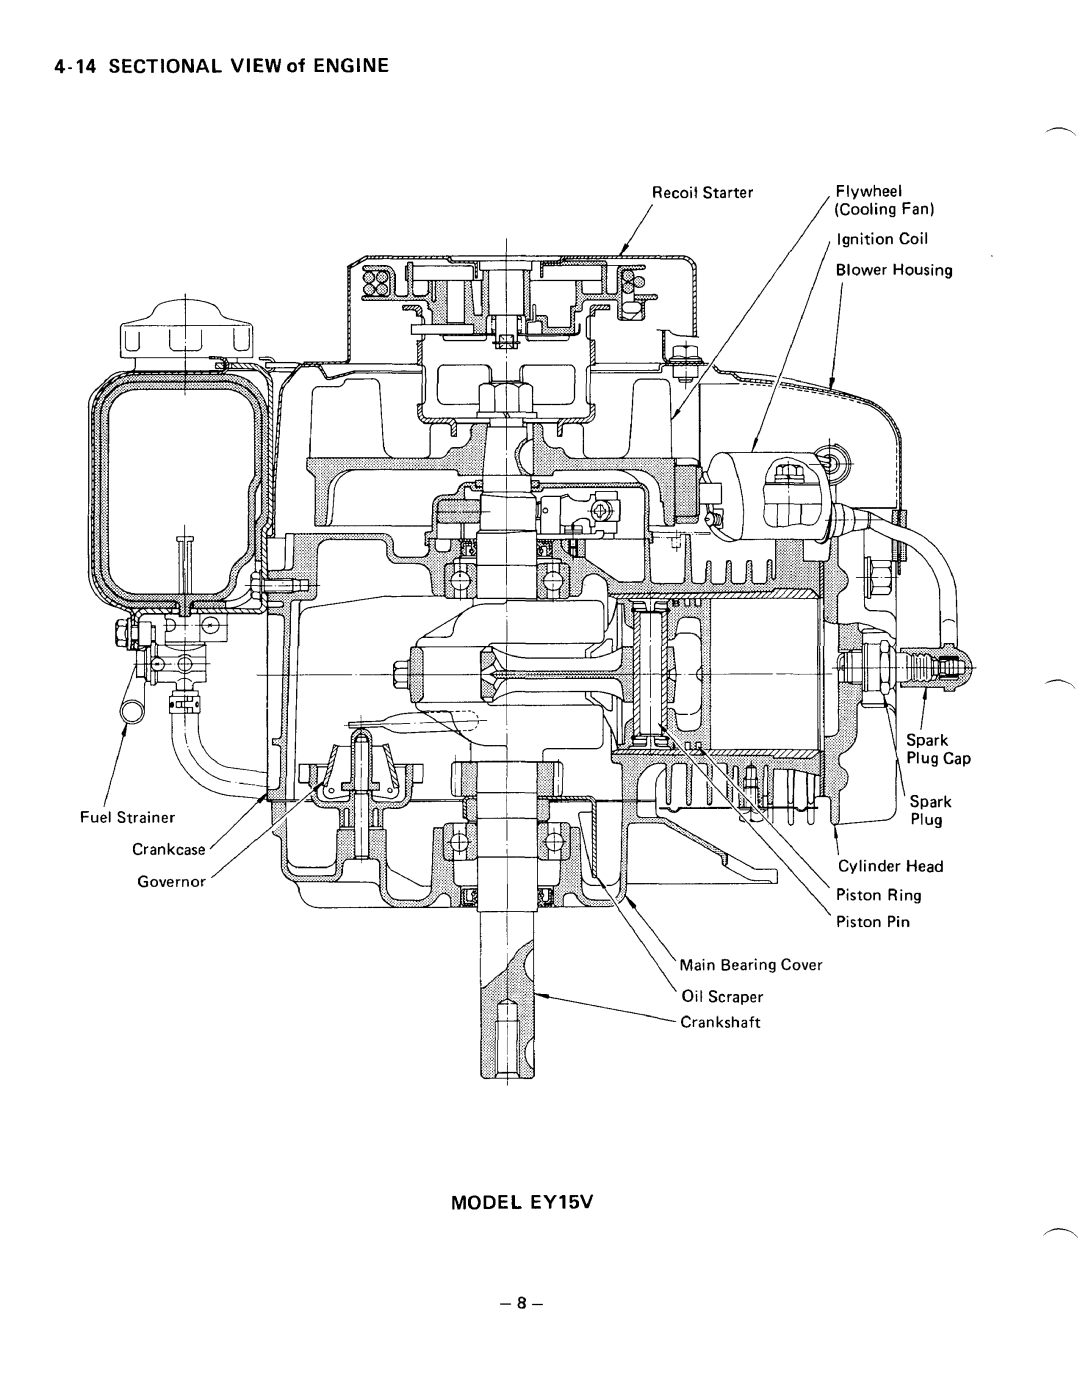 Subaru Robin Power Products EY20V manual SECTIONAL VIEW of ENGINE MODEL EY15V 